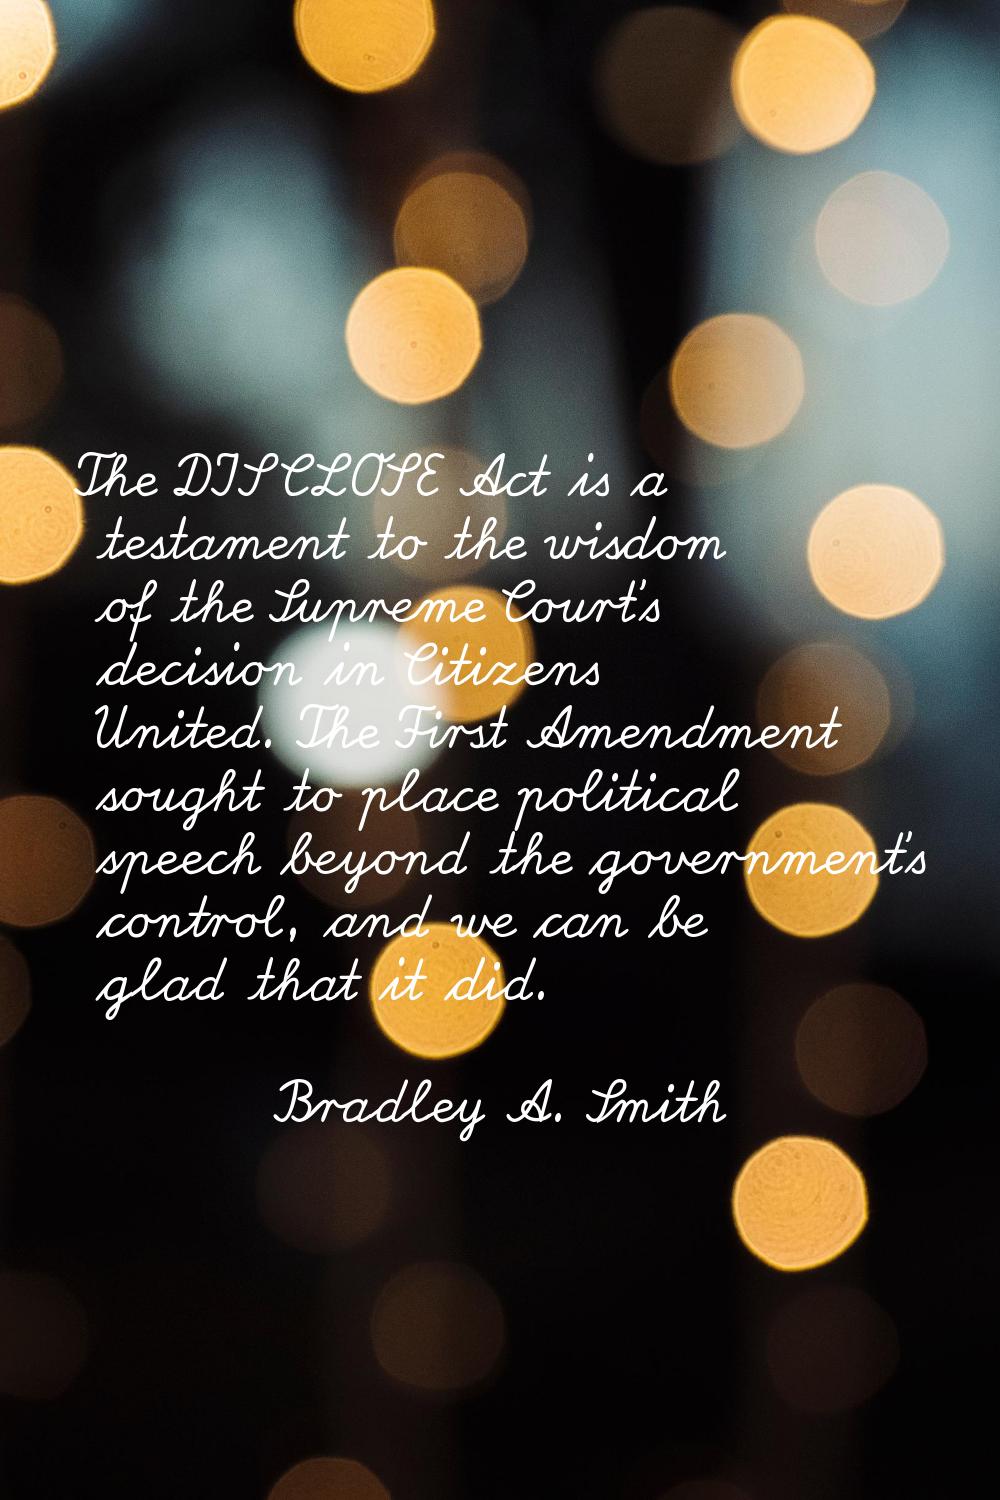 The DISCLOSE Act is a testament to the wisdom of the Supreme Court's decision in Citizens United. T